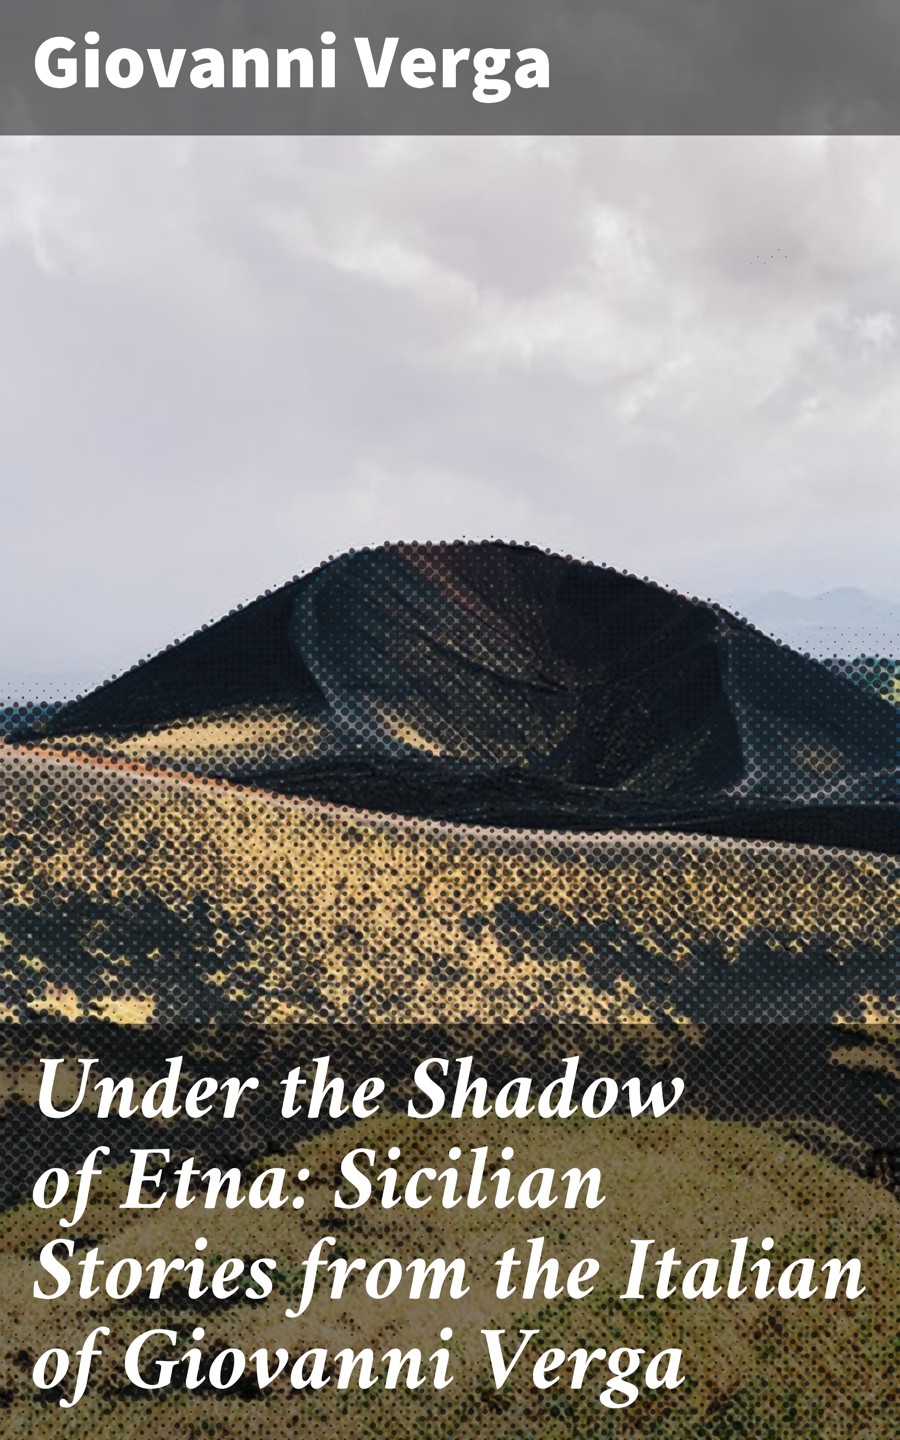 Under the Shadow of Etna: Sicilian Stories from the Italian of Giovanni Verga